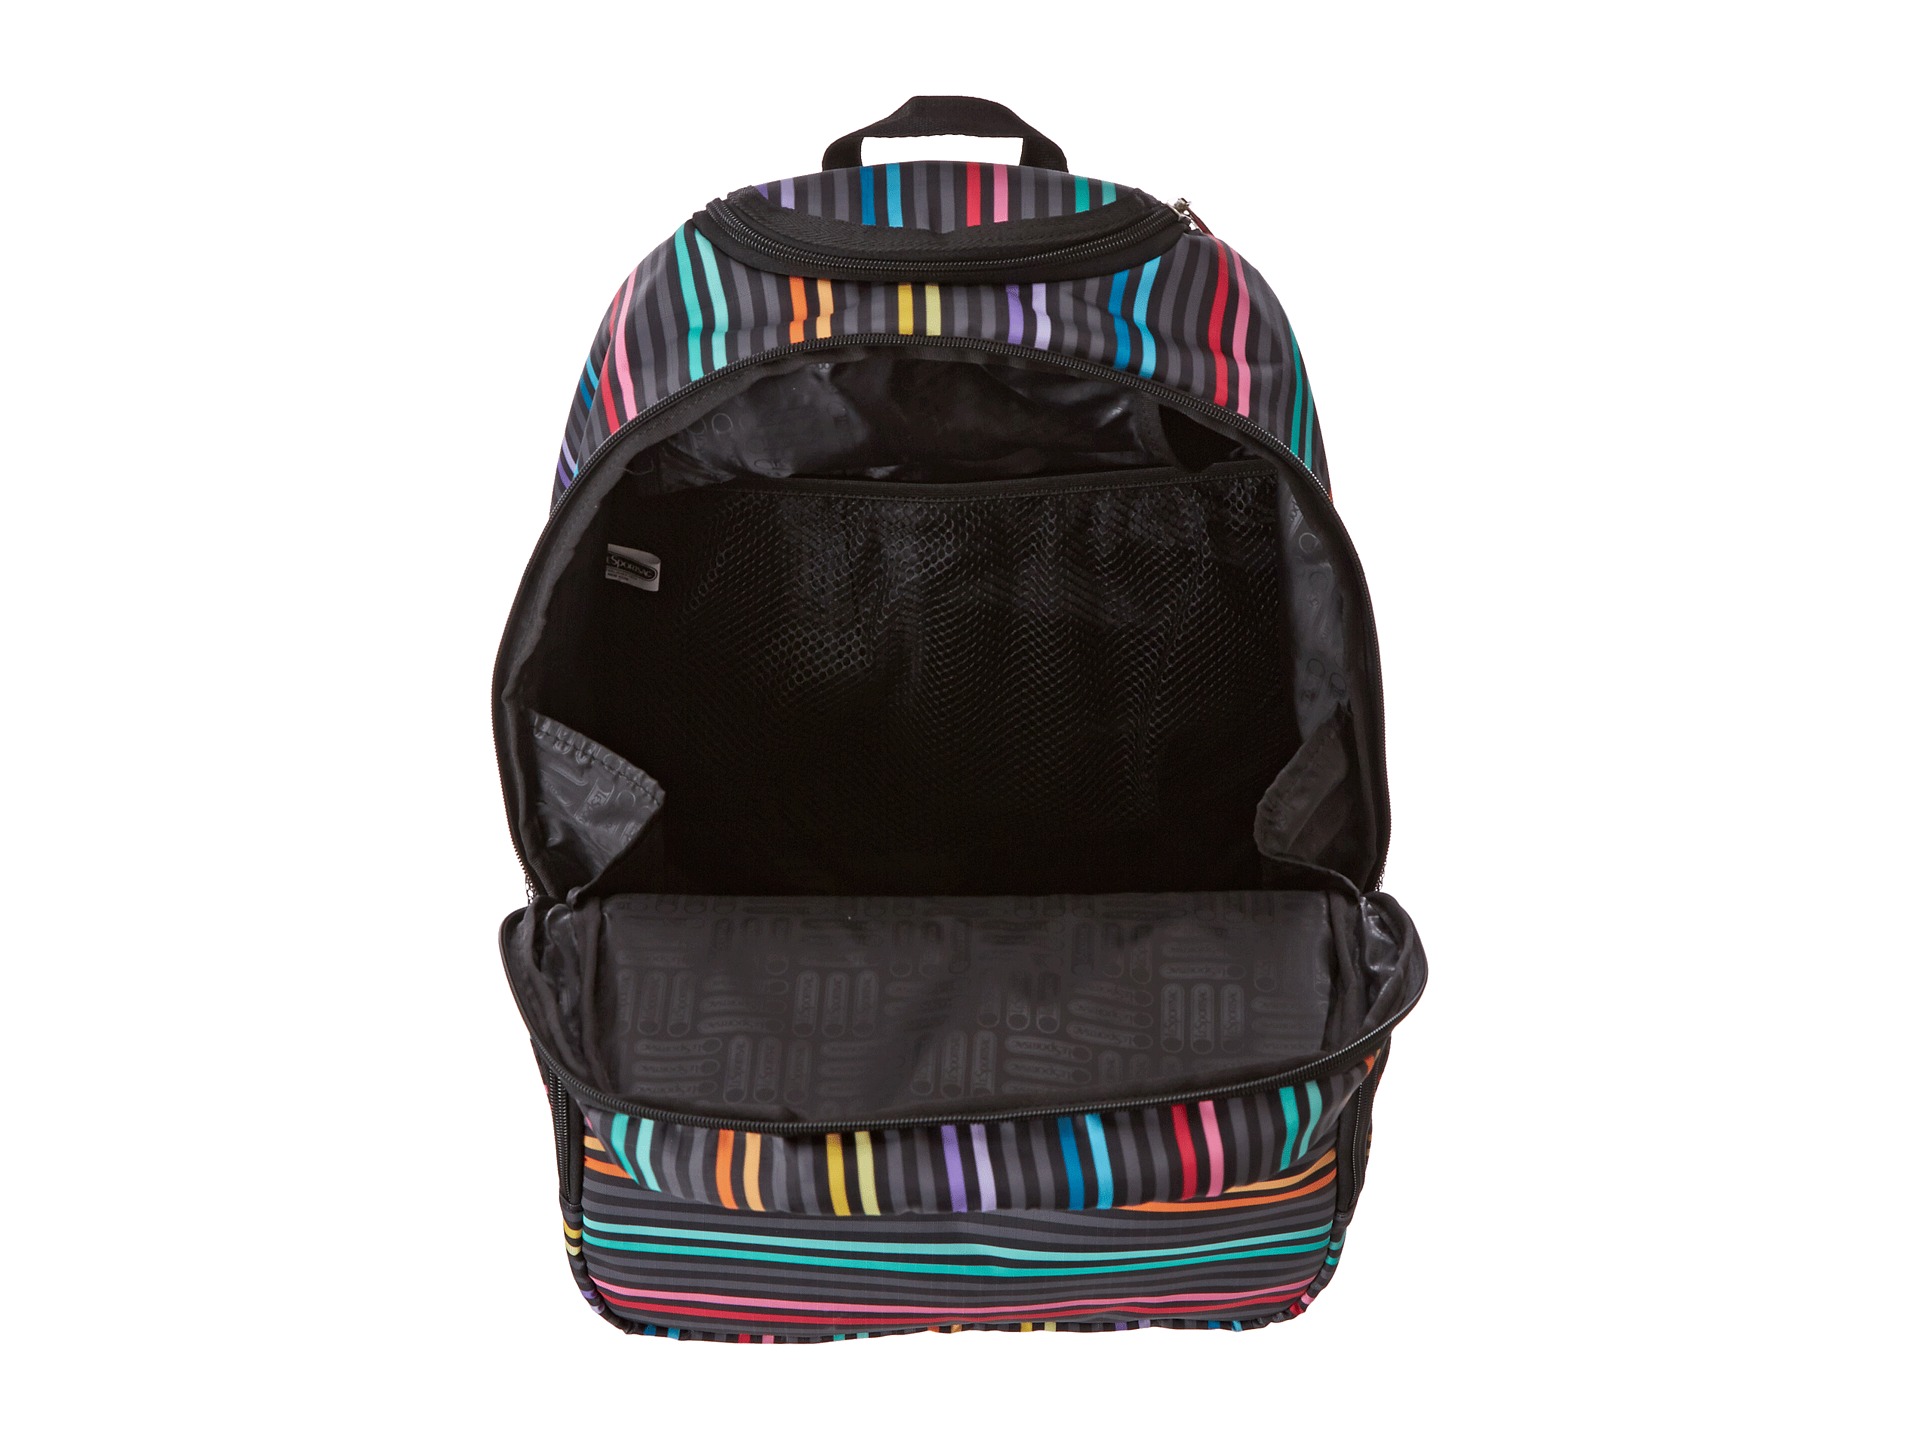 Lesportsac Luggage Rolling Backpack, Bags | Shipped Free at Zappos